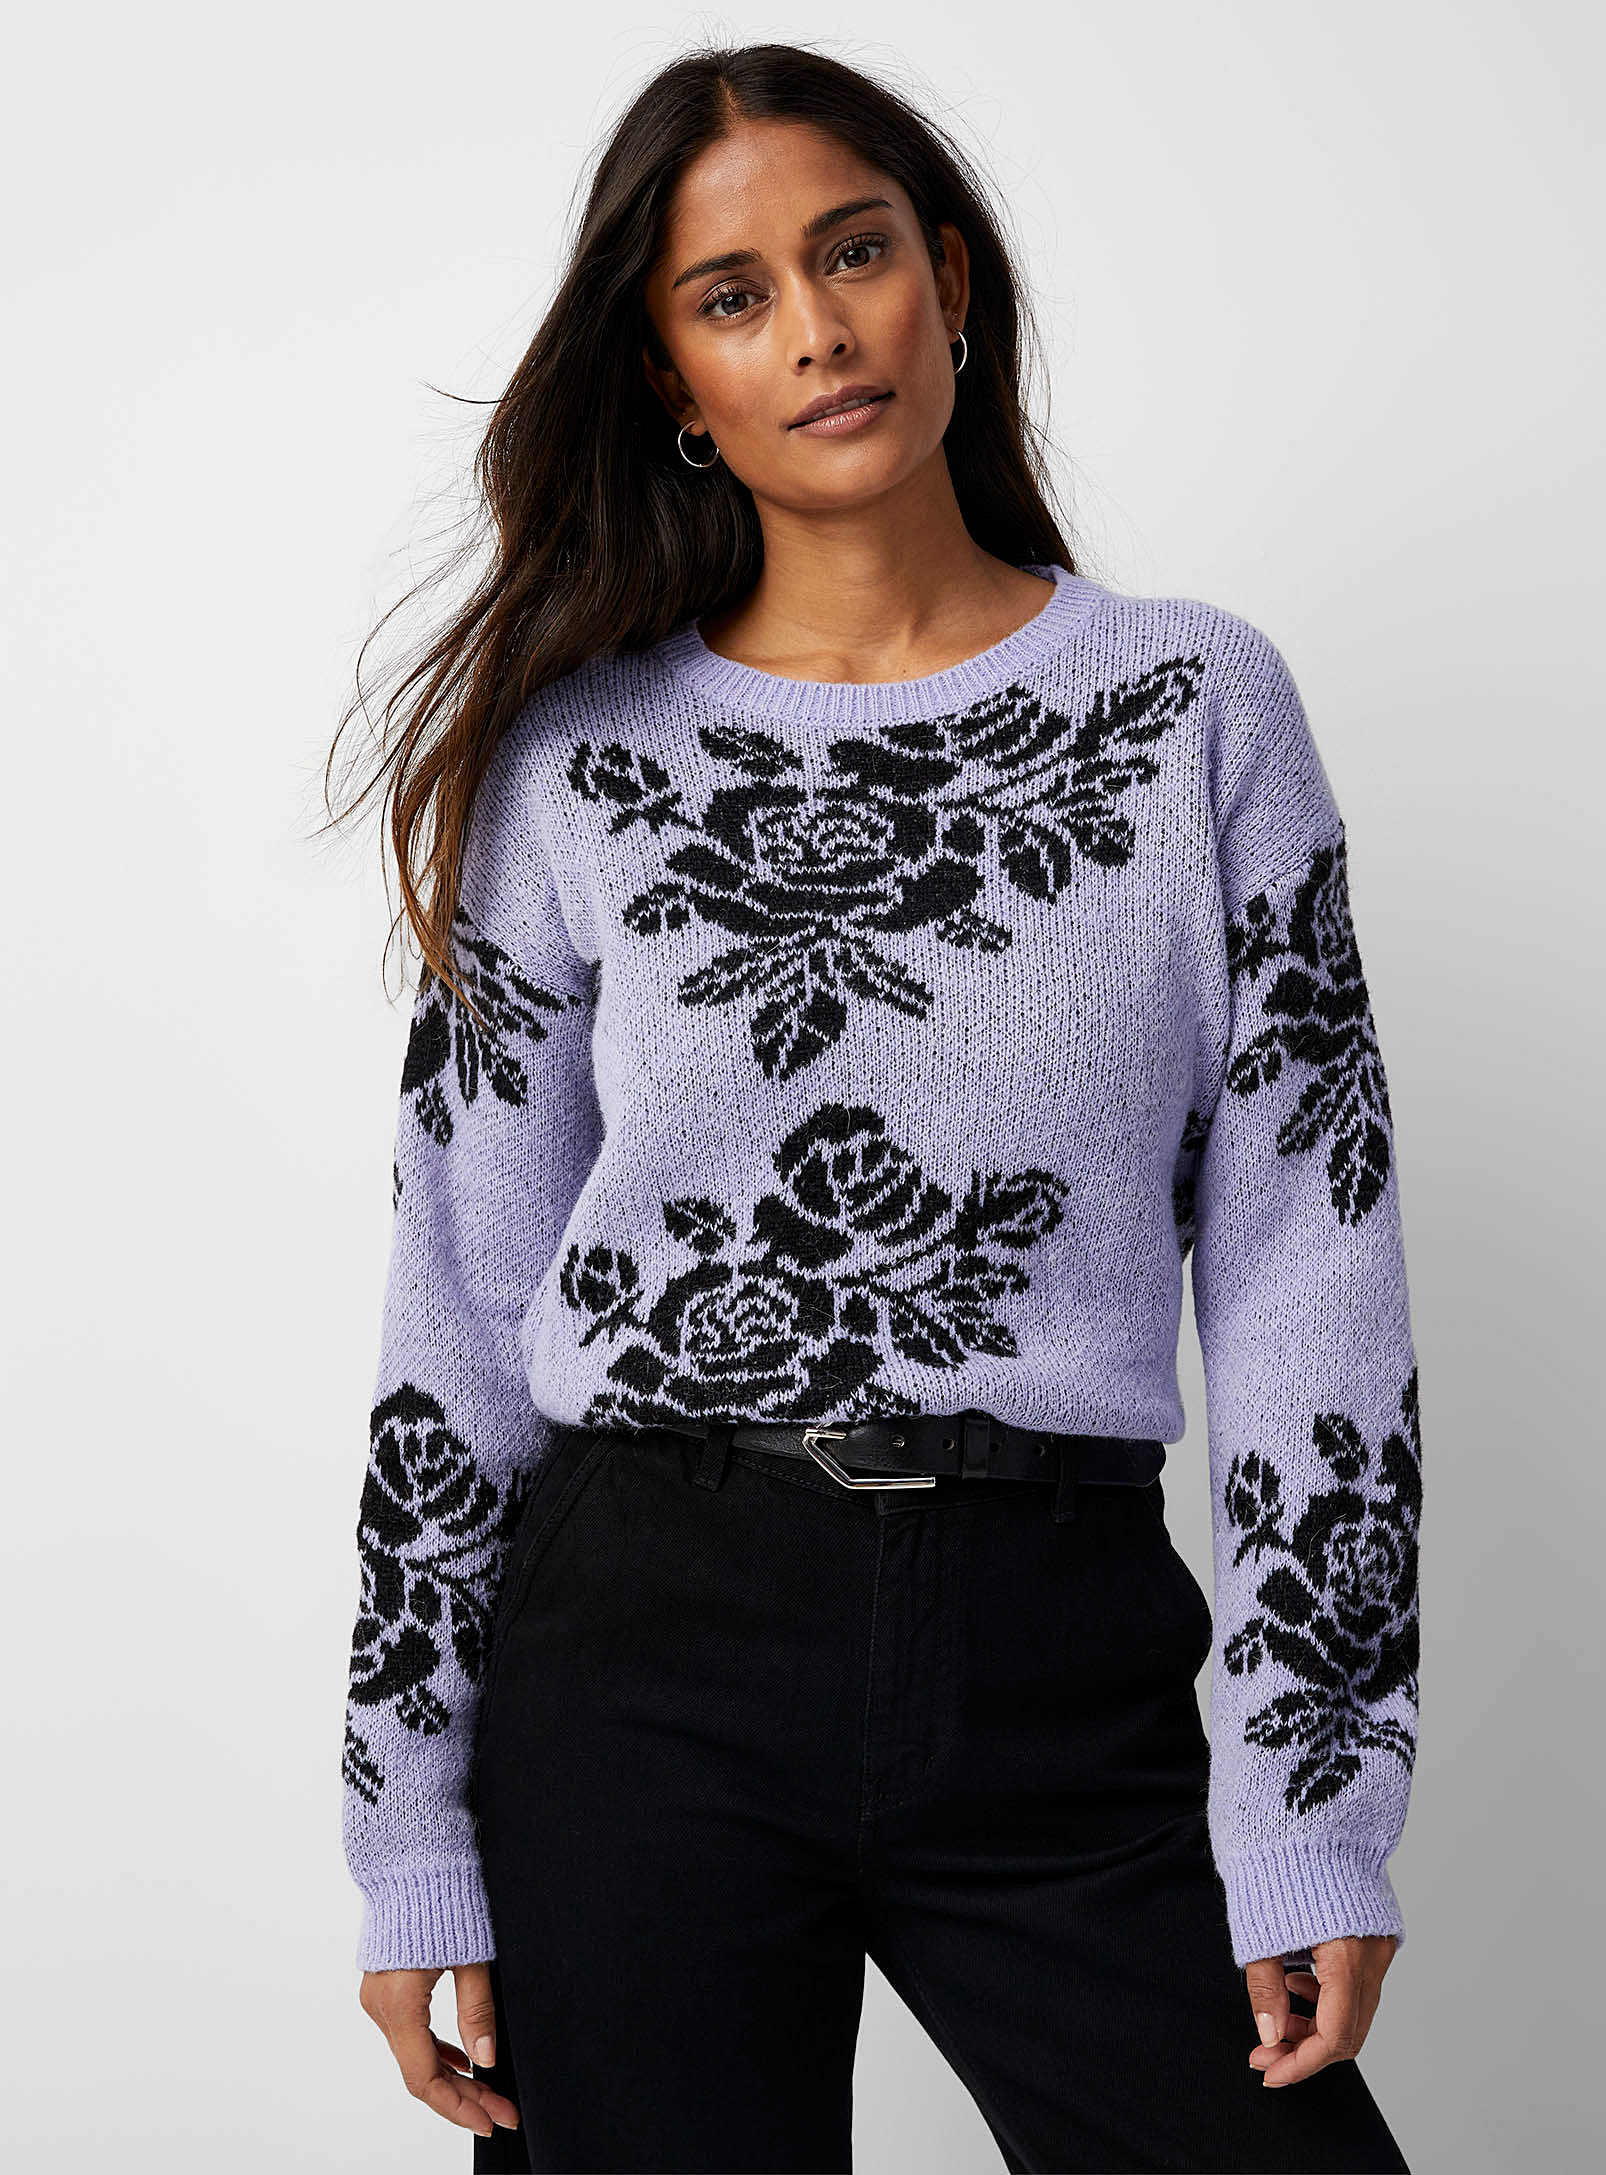 Contemporaine Brushed Flowers Jacquard Sweater in Gray